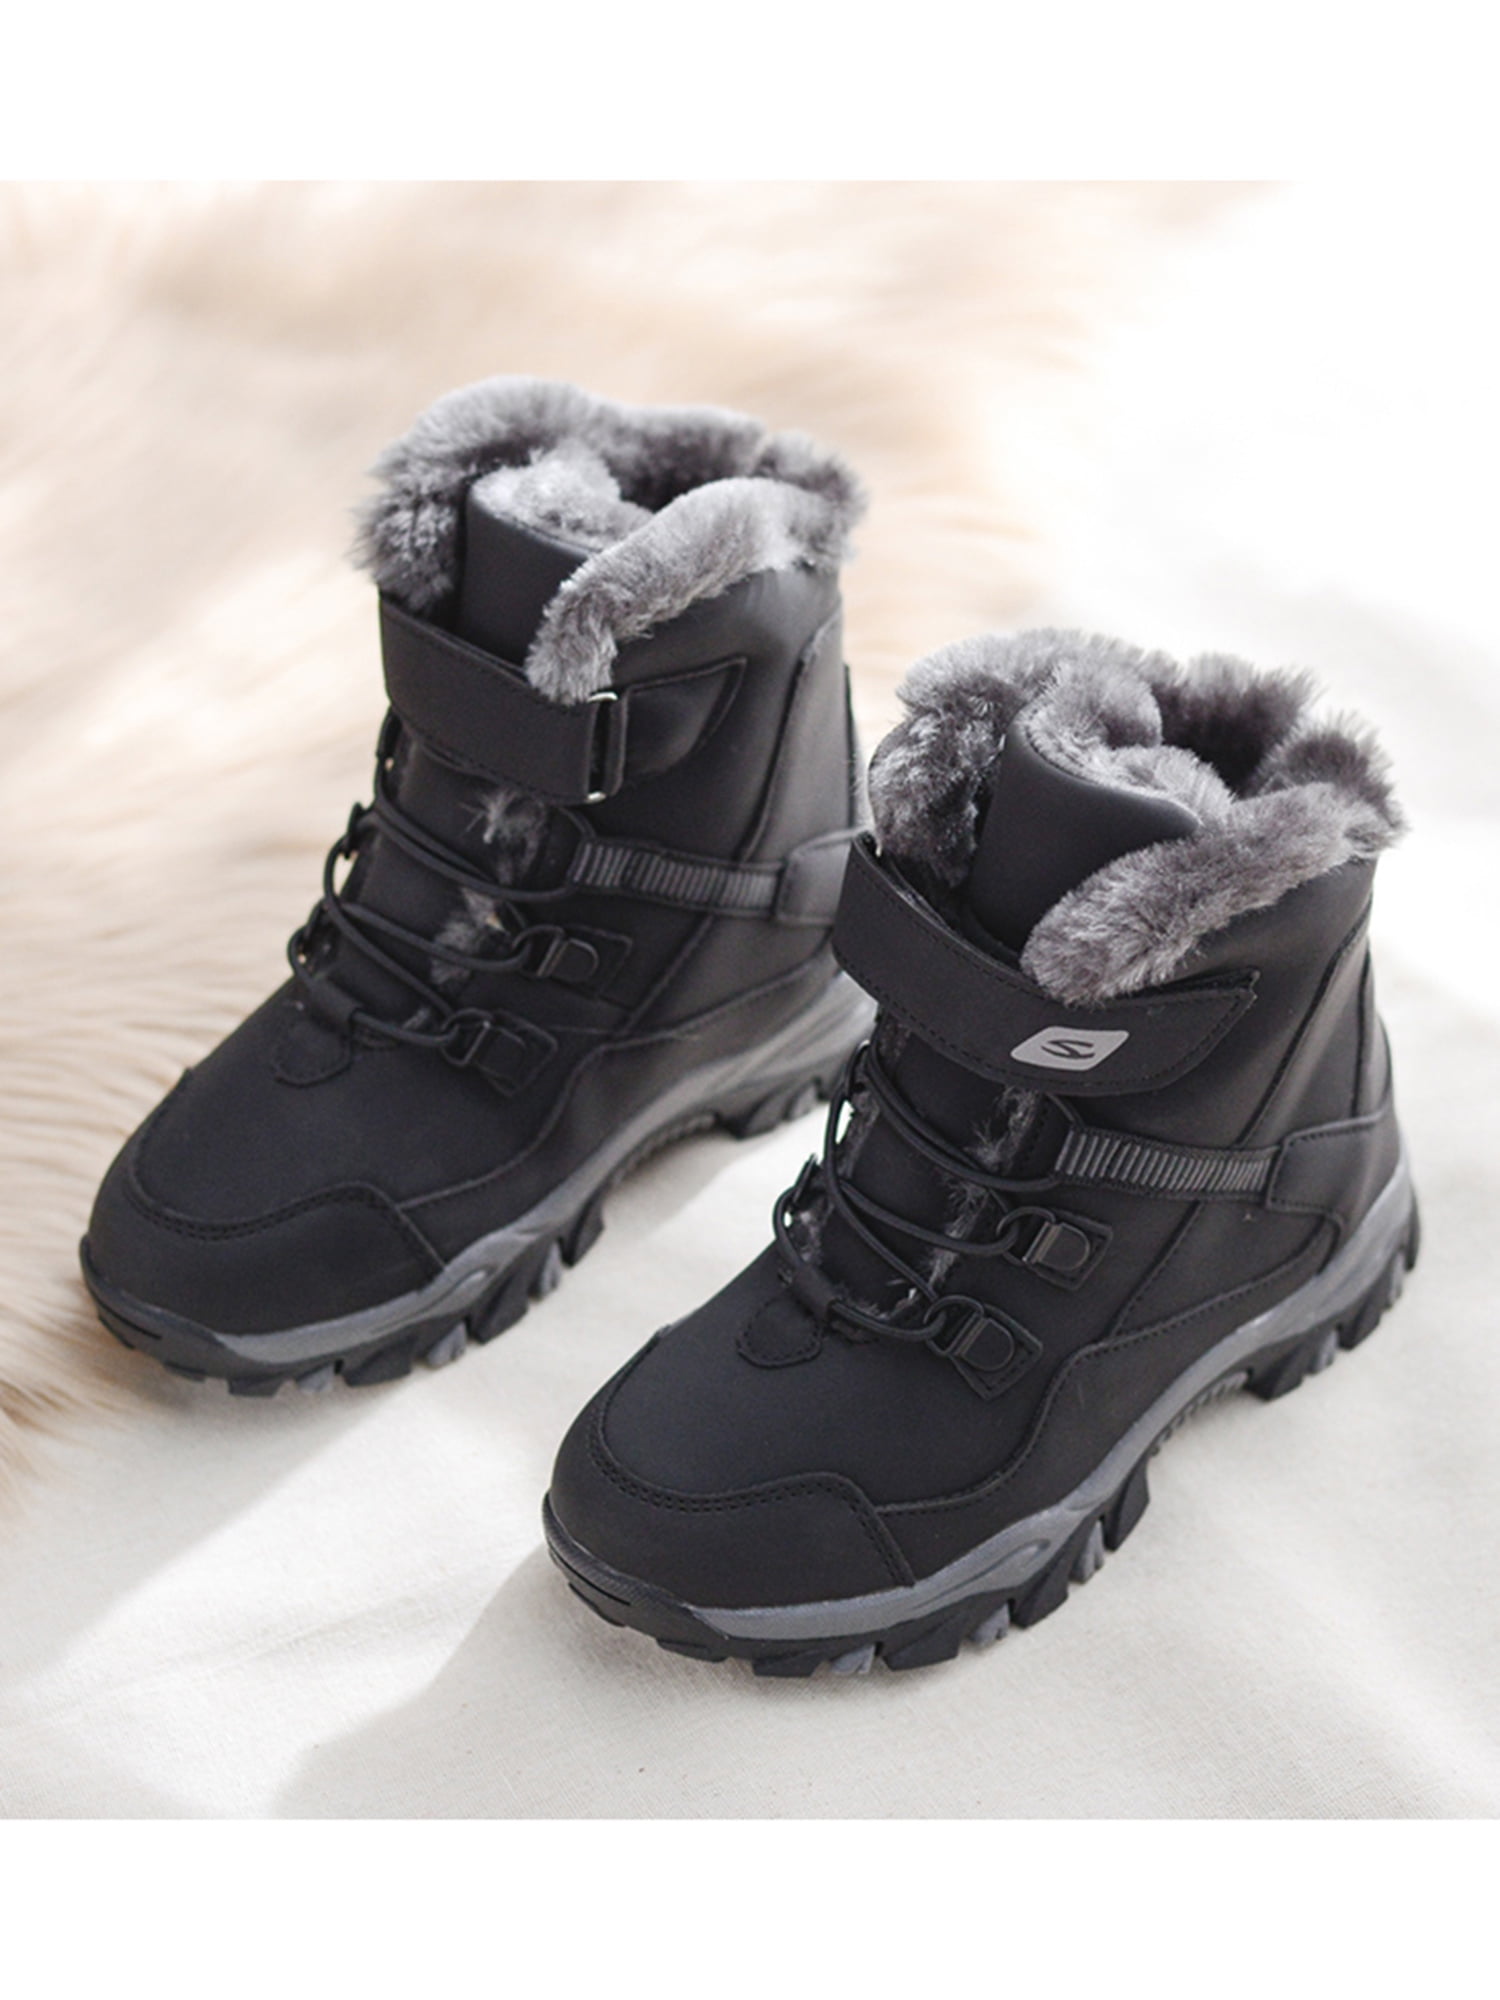 fashionable winter shoes